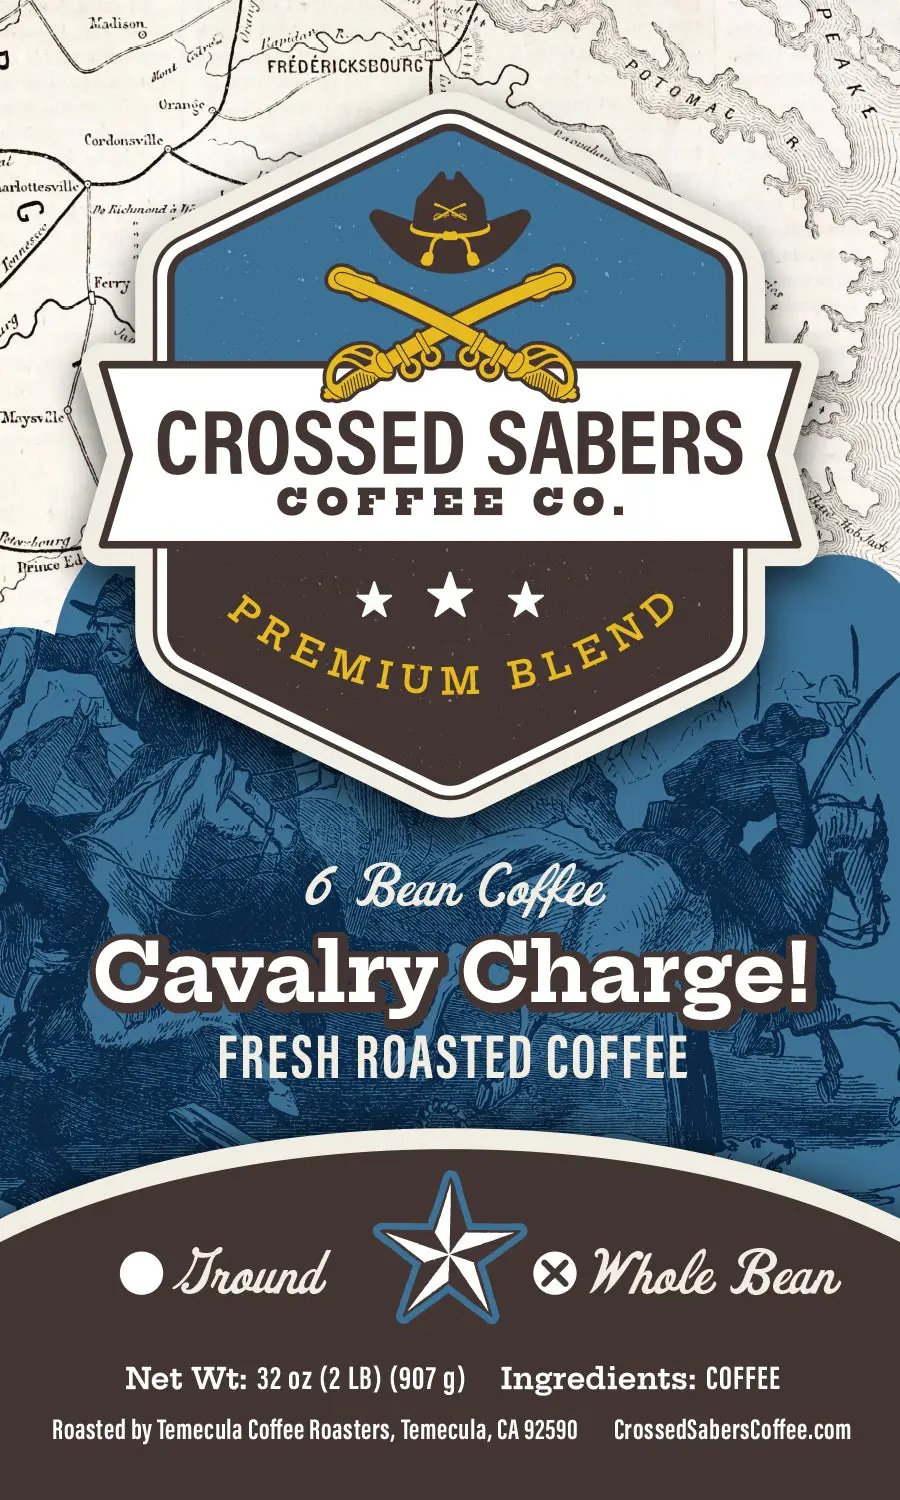 Crossed Sabers Coffee Cavalry Charge! 2lb Whole Bean